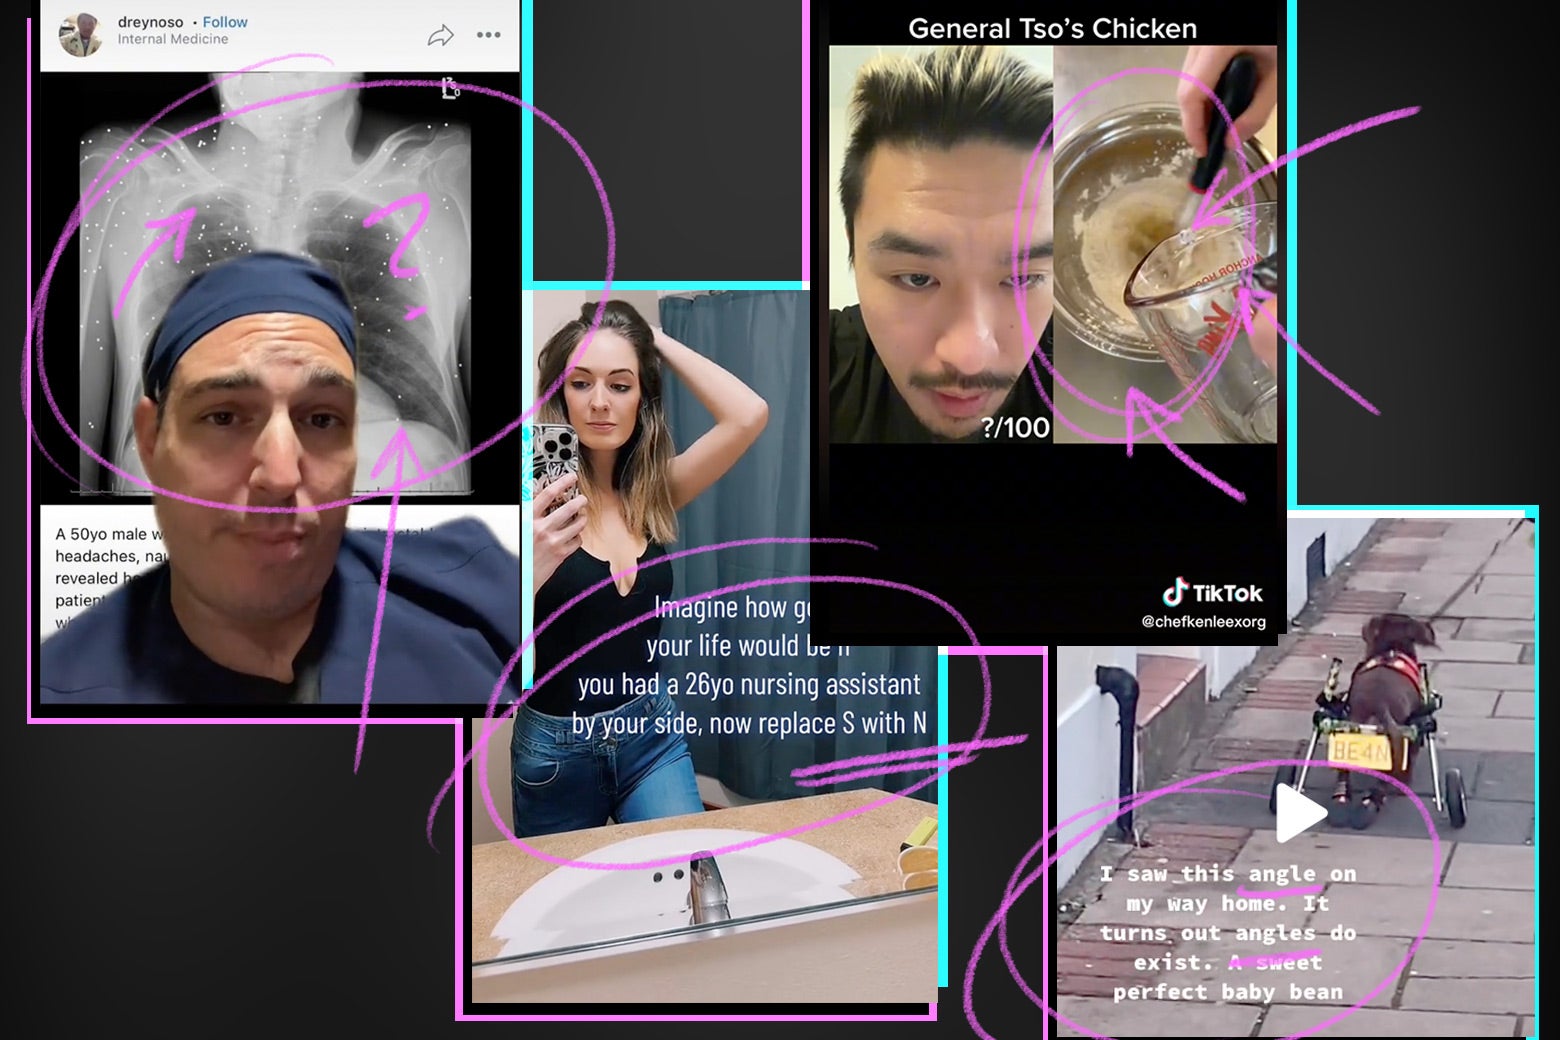 A collage of four TikTok screenshots: One of a doctor standing in front of an MRI, another of a young woman taking a selfie in a bathroom mirror, another of a chef reviewing a recipe, and a final of a dog with the caption "I saw this little angle on my way home."